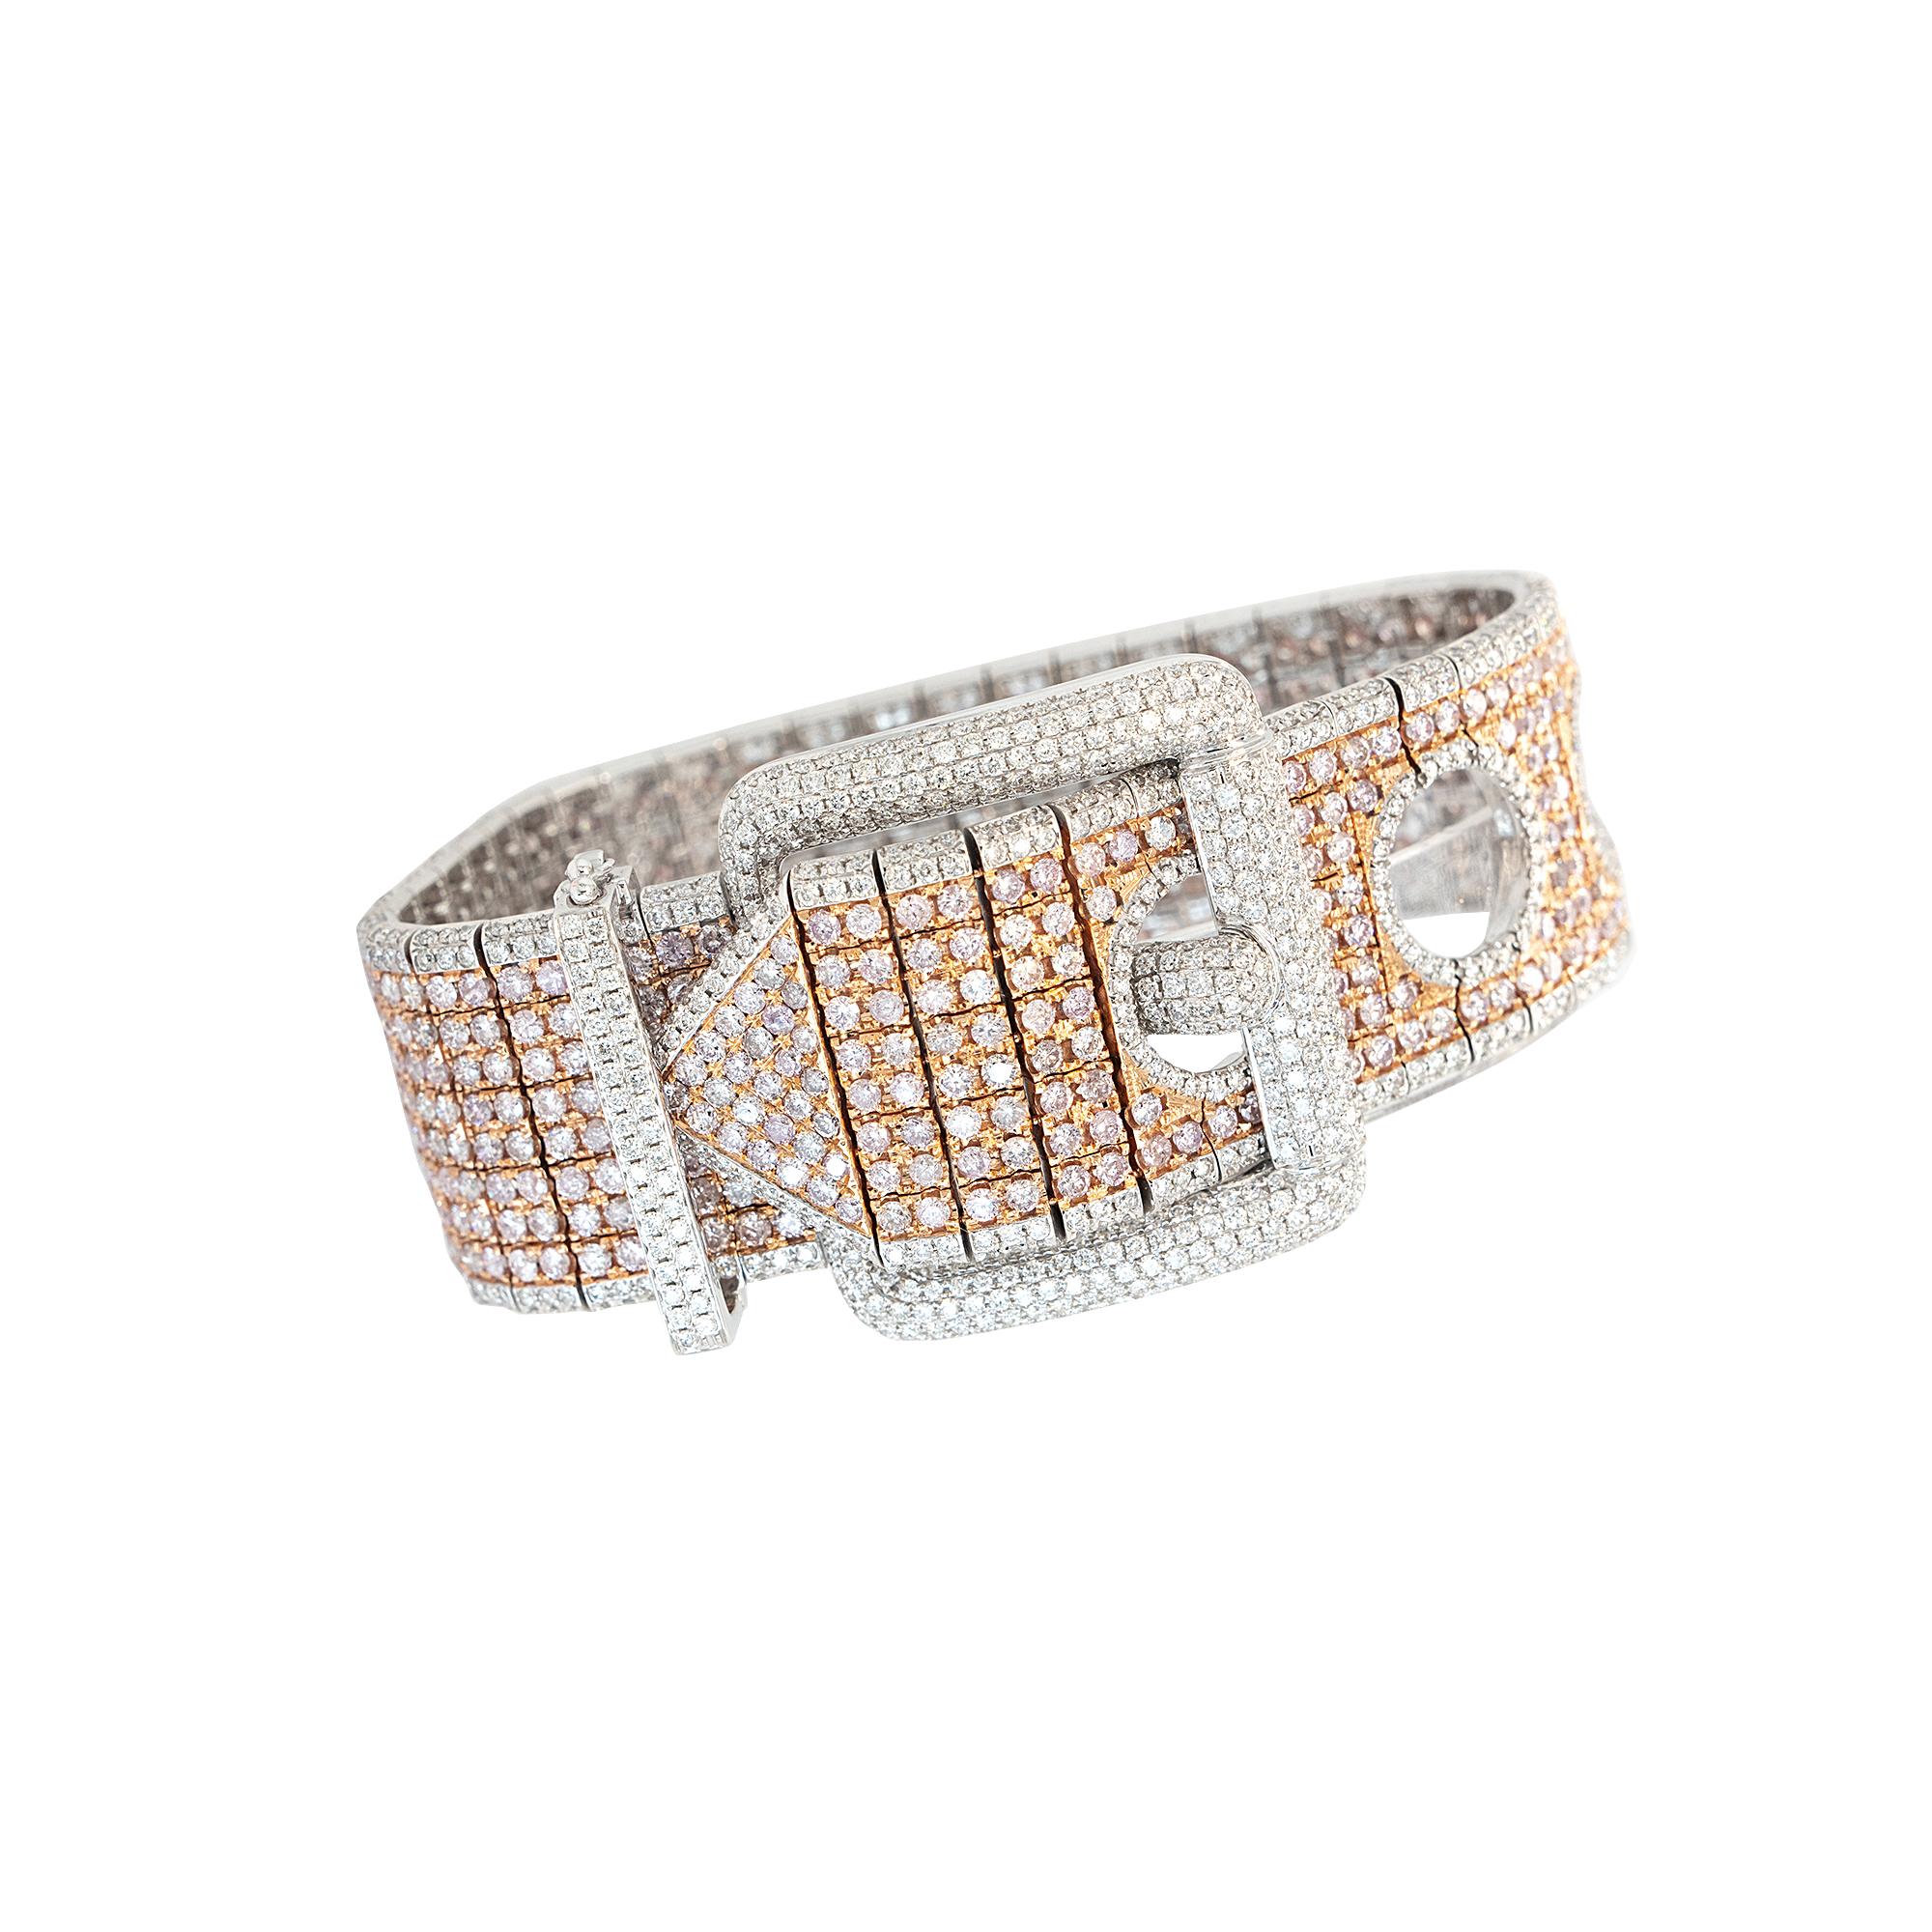 Material: 18kt White and Rose Gold
Diamond Details:	
Apdiatw= 8.64cts
ApPnkdiatw= 20.31cts
Approx stones= 1626
Approx clarity natural pink  diamonds= SI
Approx clarity natural white  diamonds= SI
Approx natural white diamond  color=